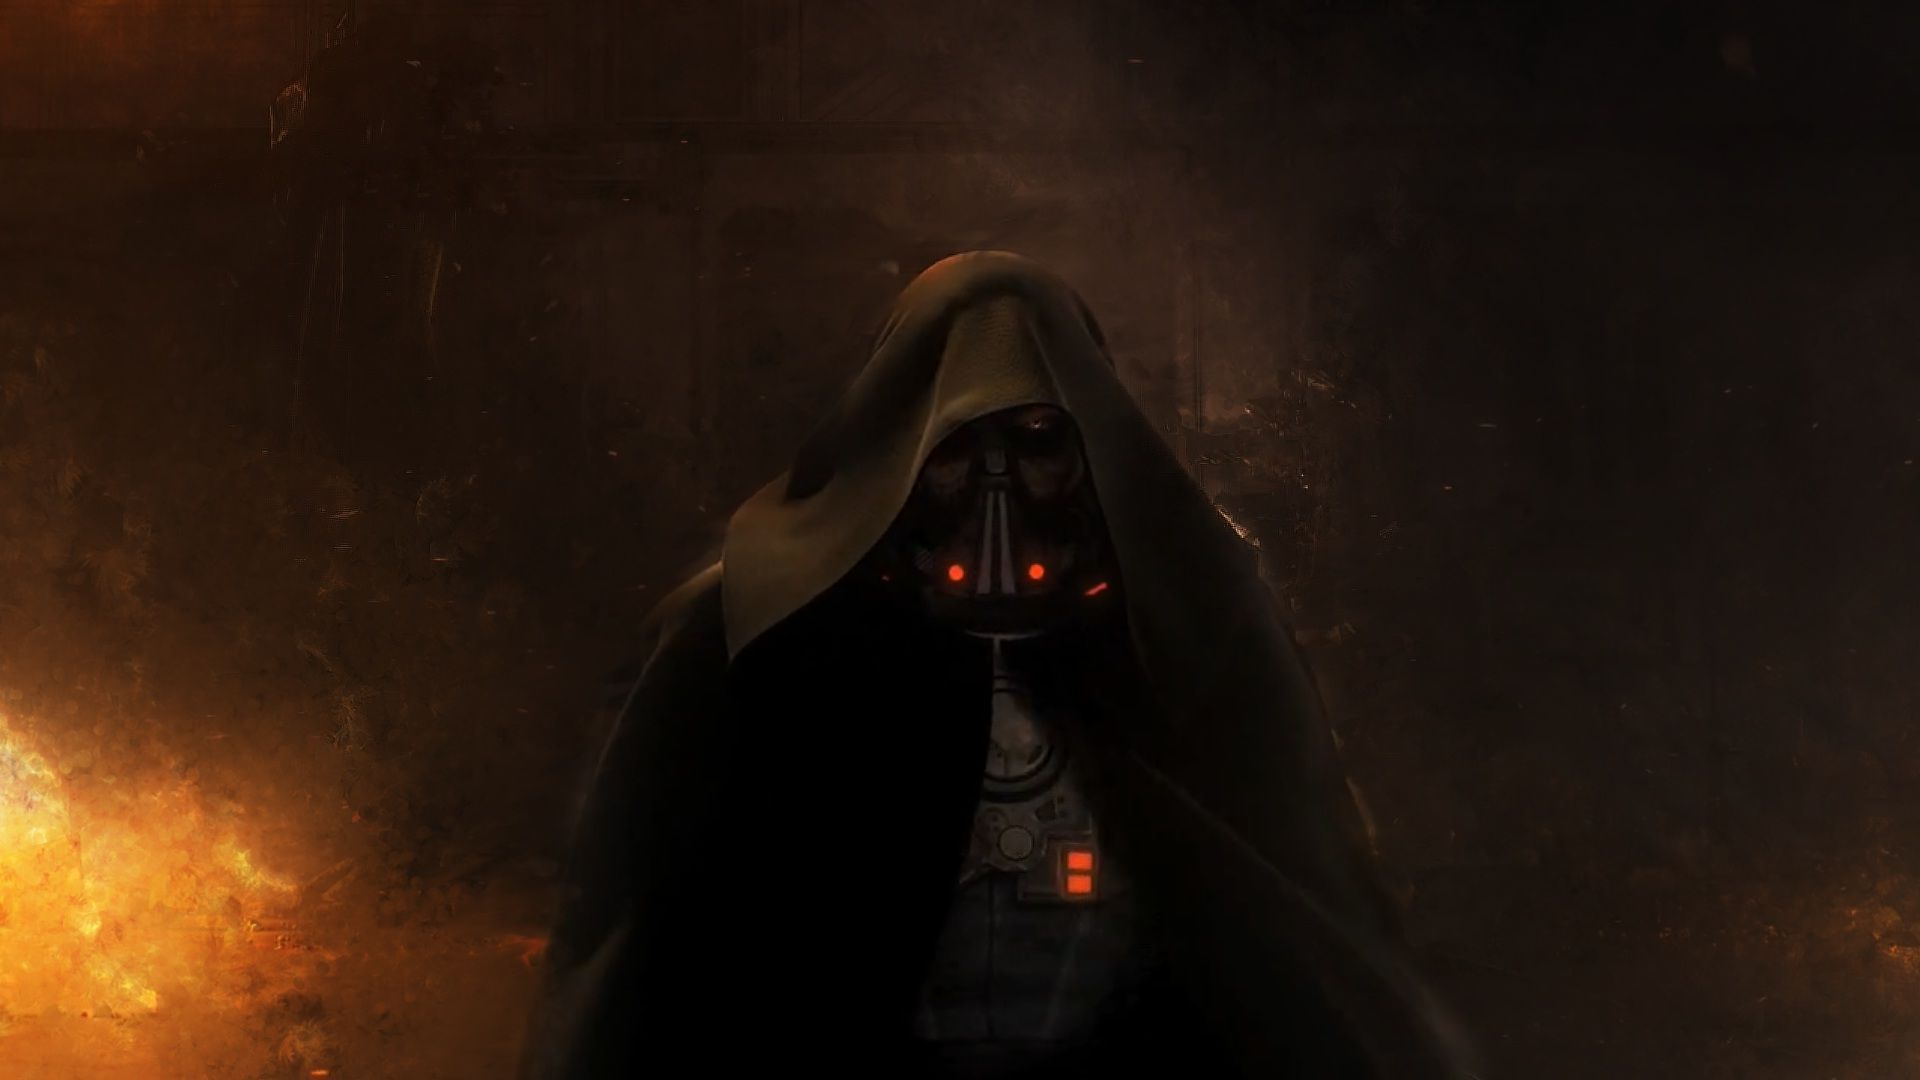 Star Wars Sith Wallpapers 1920x1080